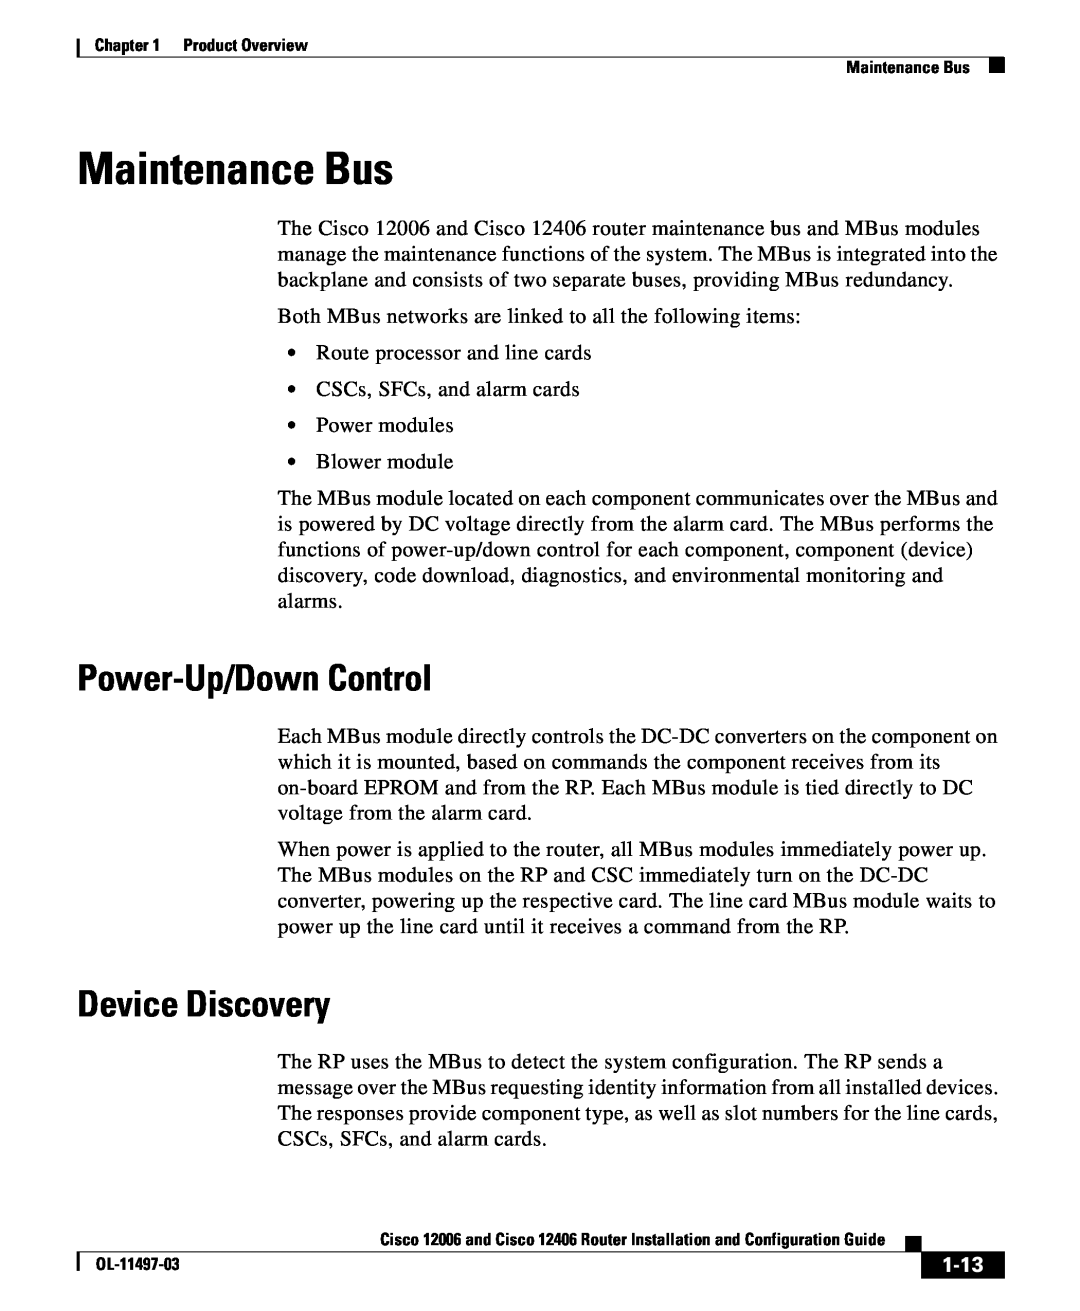 Cisco Systems 12006 series, 12406 series manual Maintenance Bus, Power-Up/Down Control, Device Discovery, 1-13 